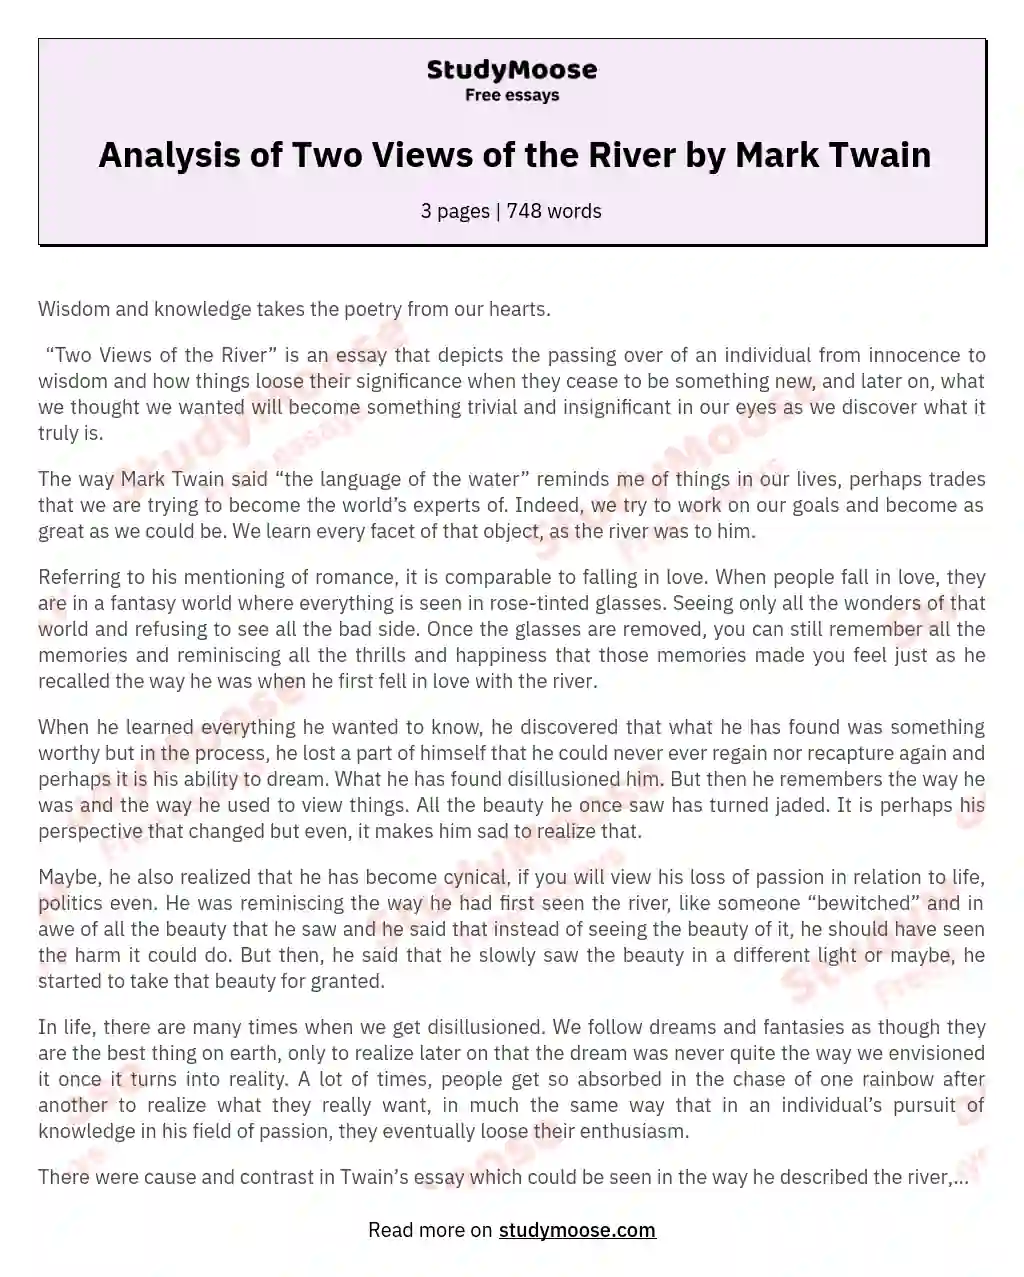 Analysis of Two Views of the River by Mark Twain essay